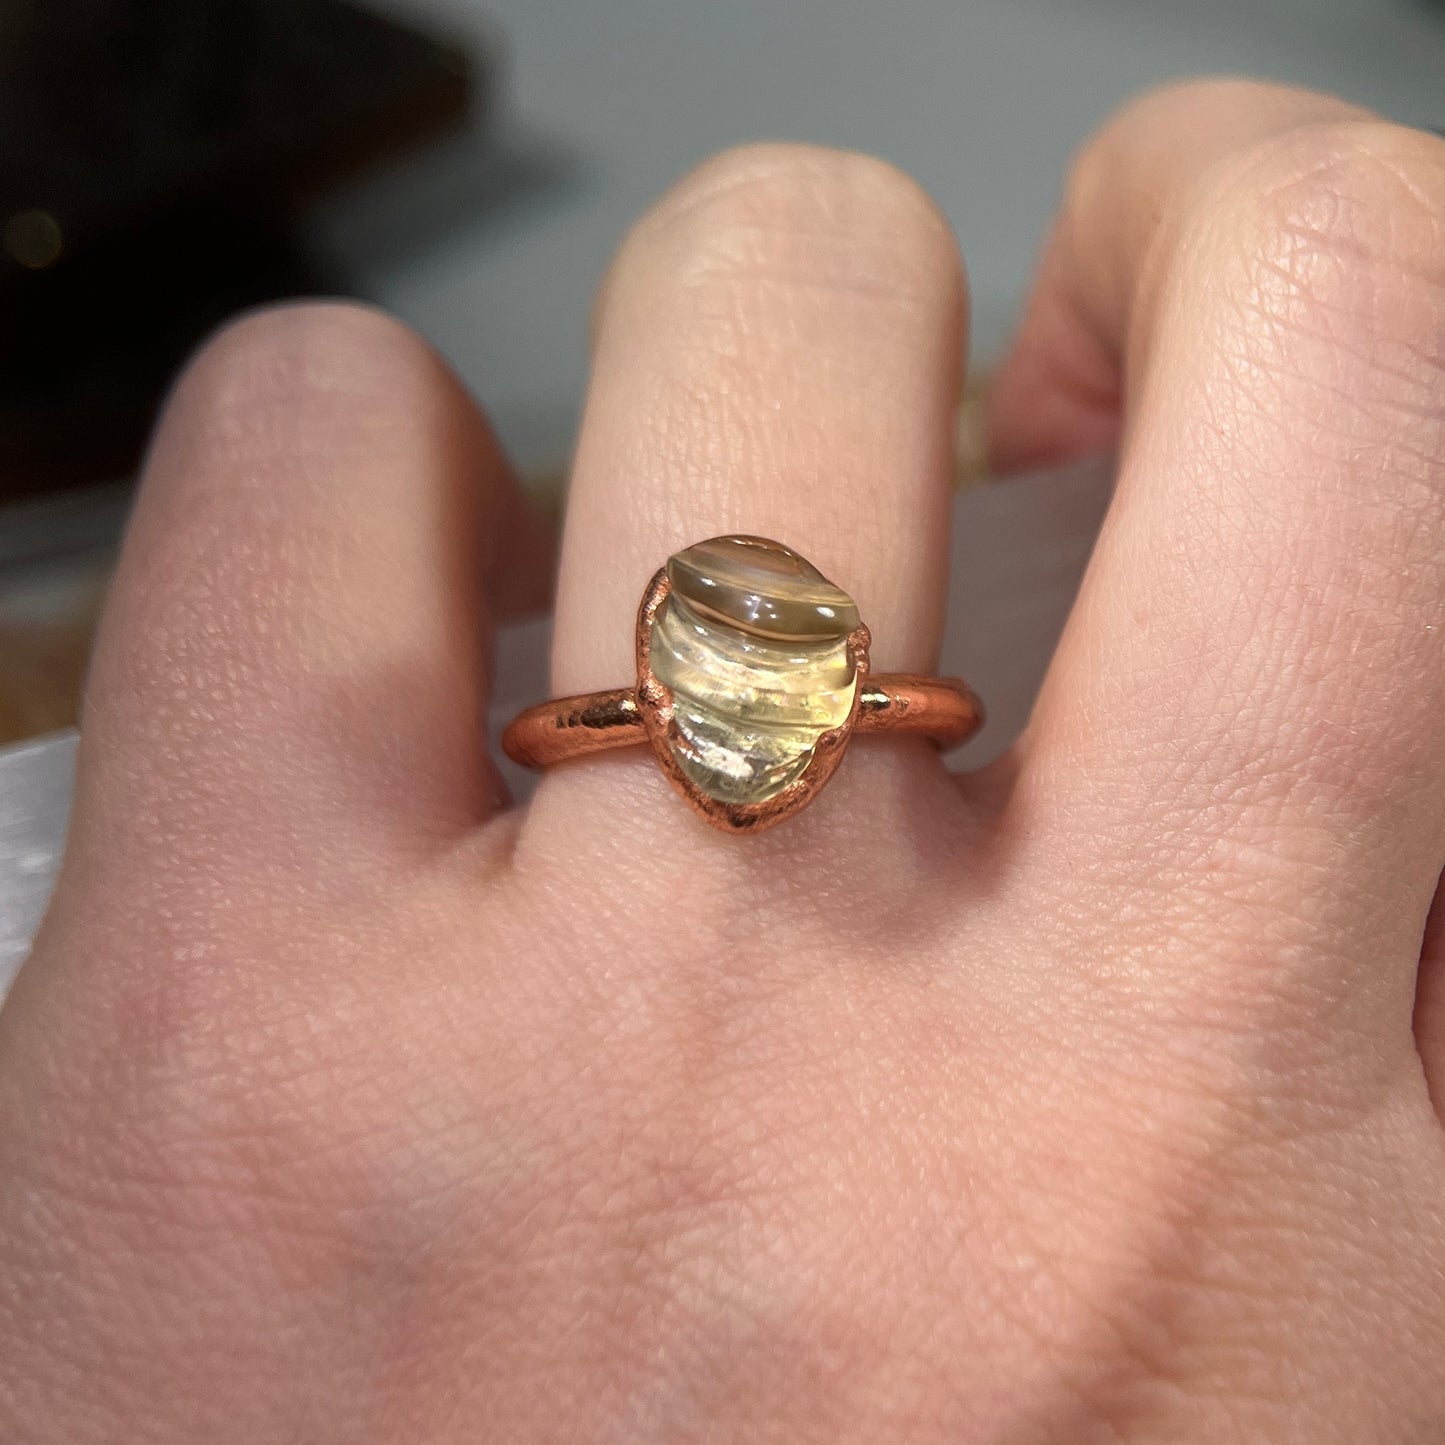 Carved Citrine Crystal Ring Size 7.5